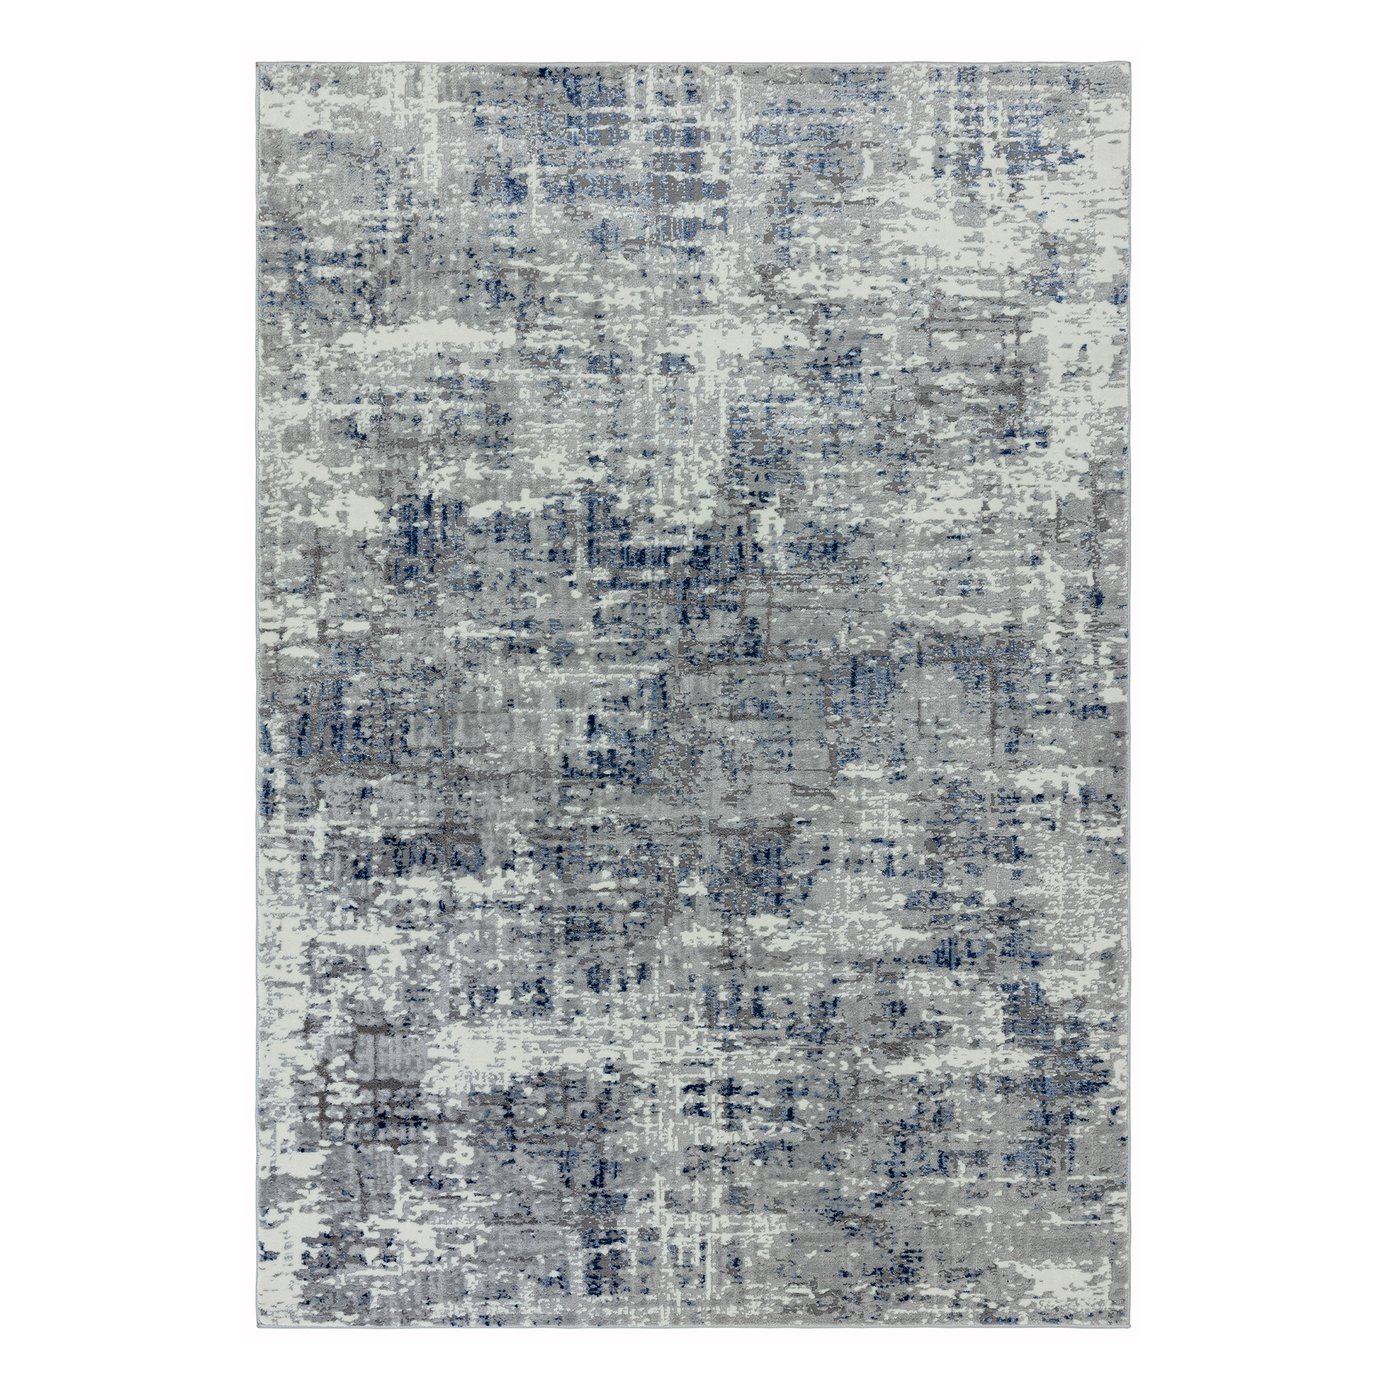 Asiatic Orion Shiny Rectangle Rug - 160x230cm - Blue & Grey